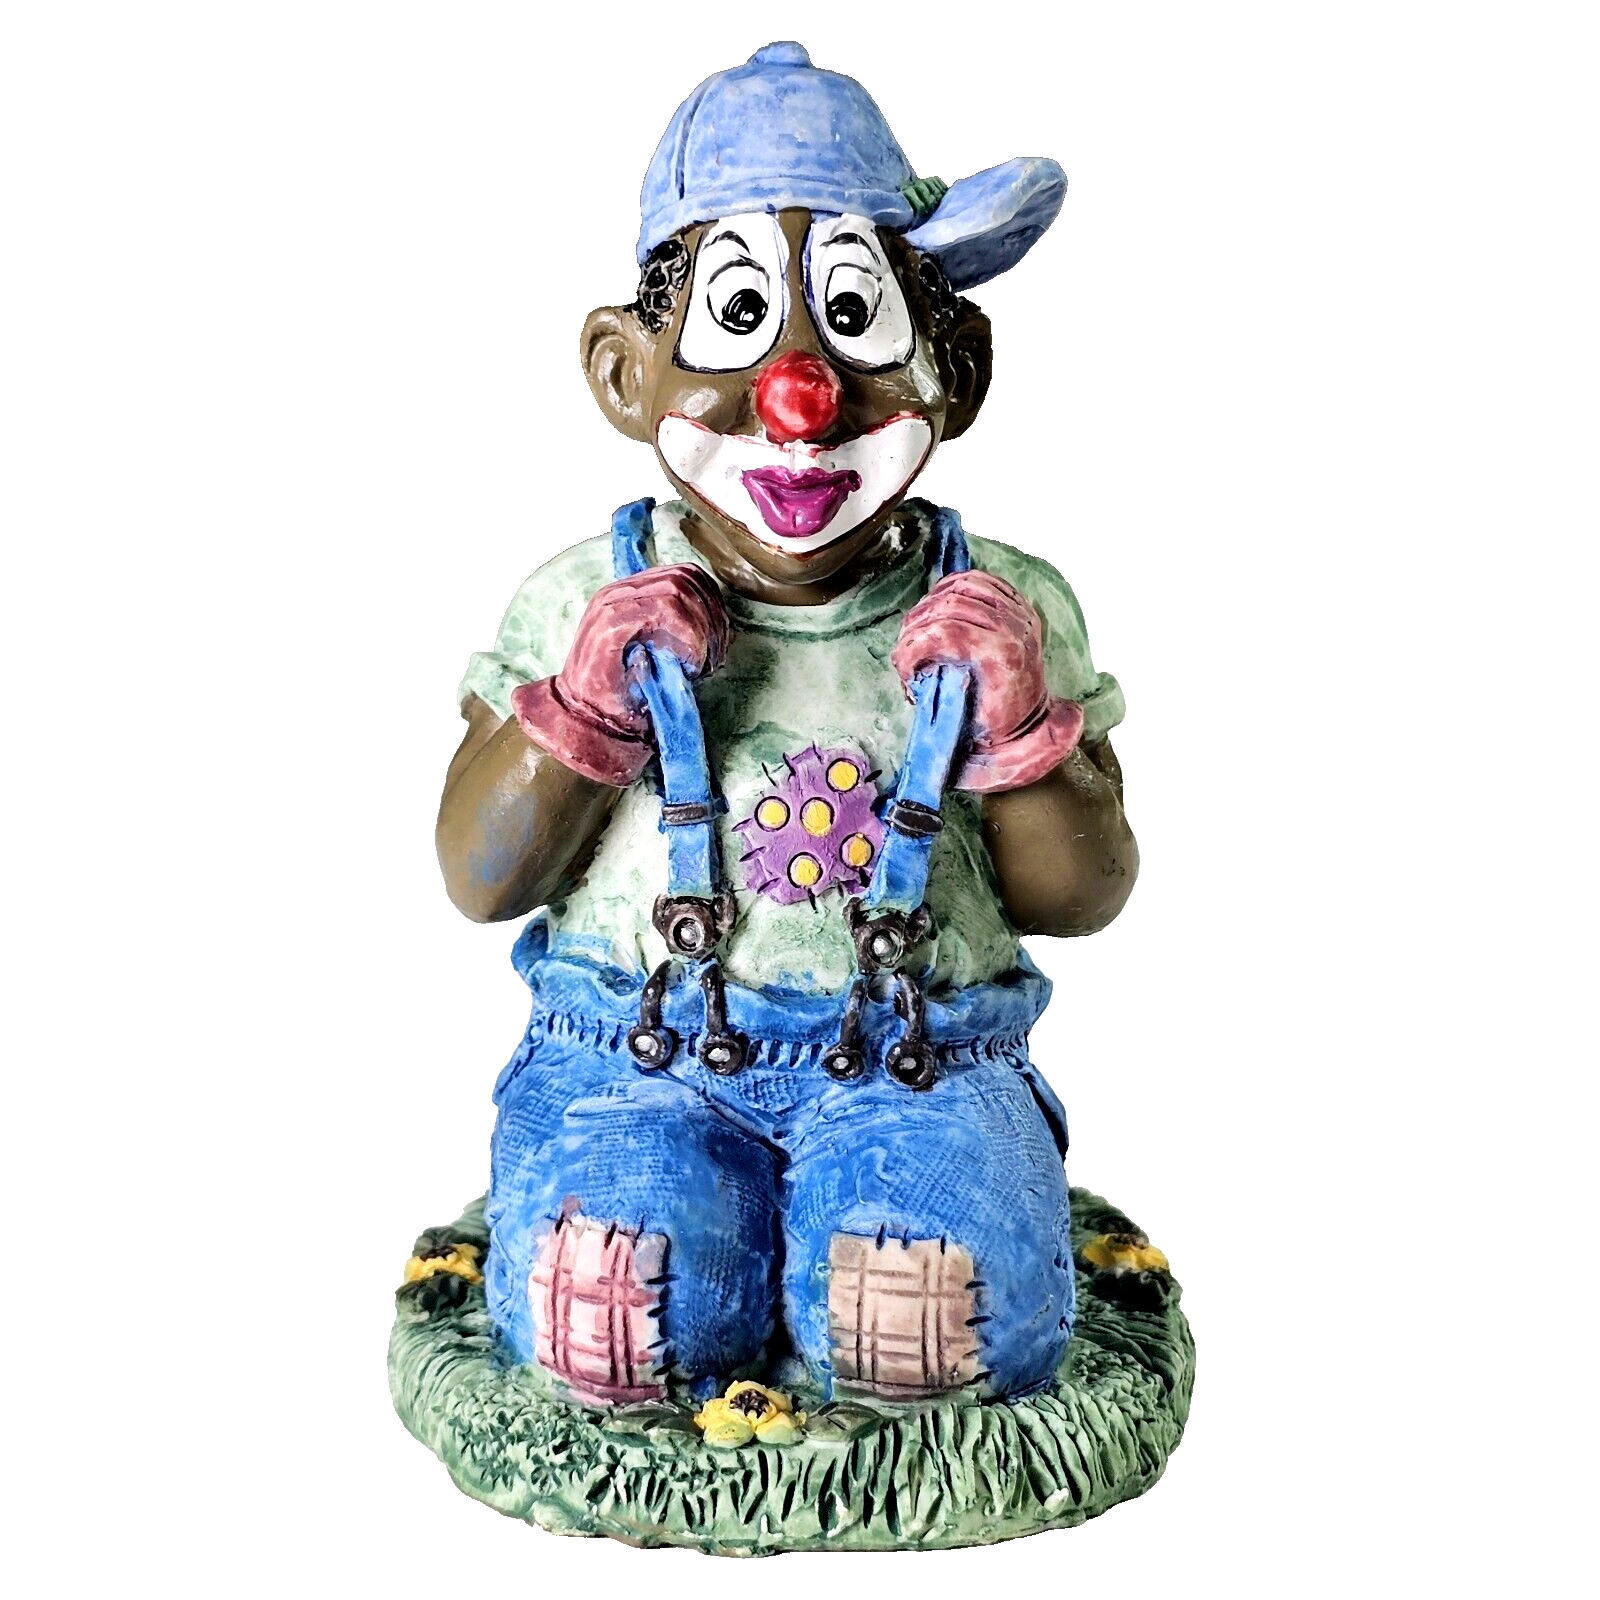 Vintage African American Clown Figurine by Young's Inc. Boy Kneeling Green 4in